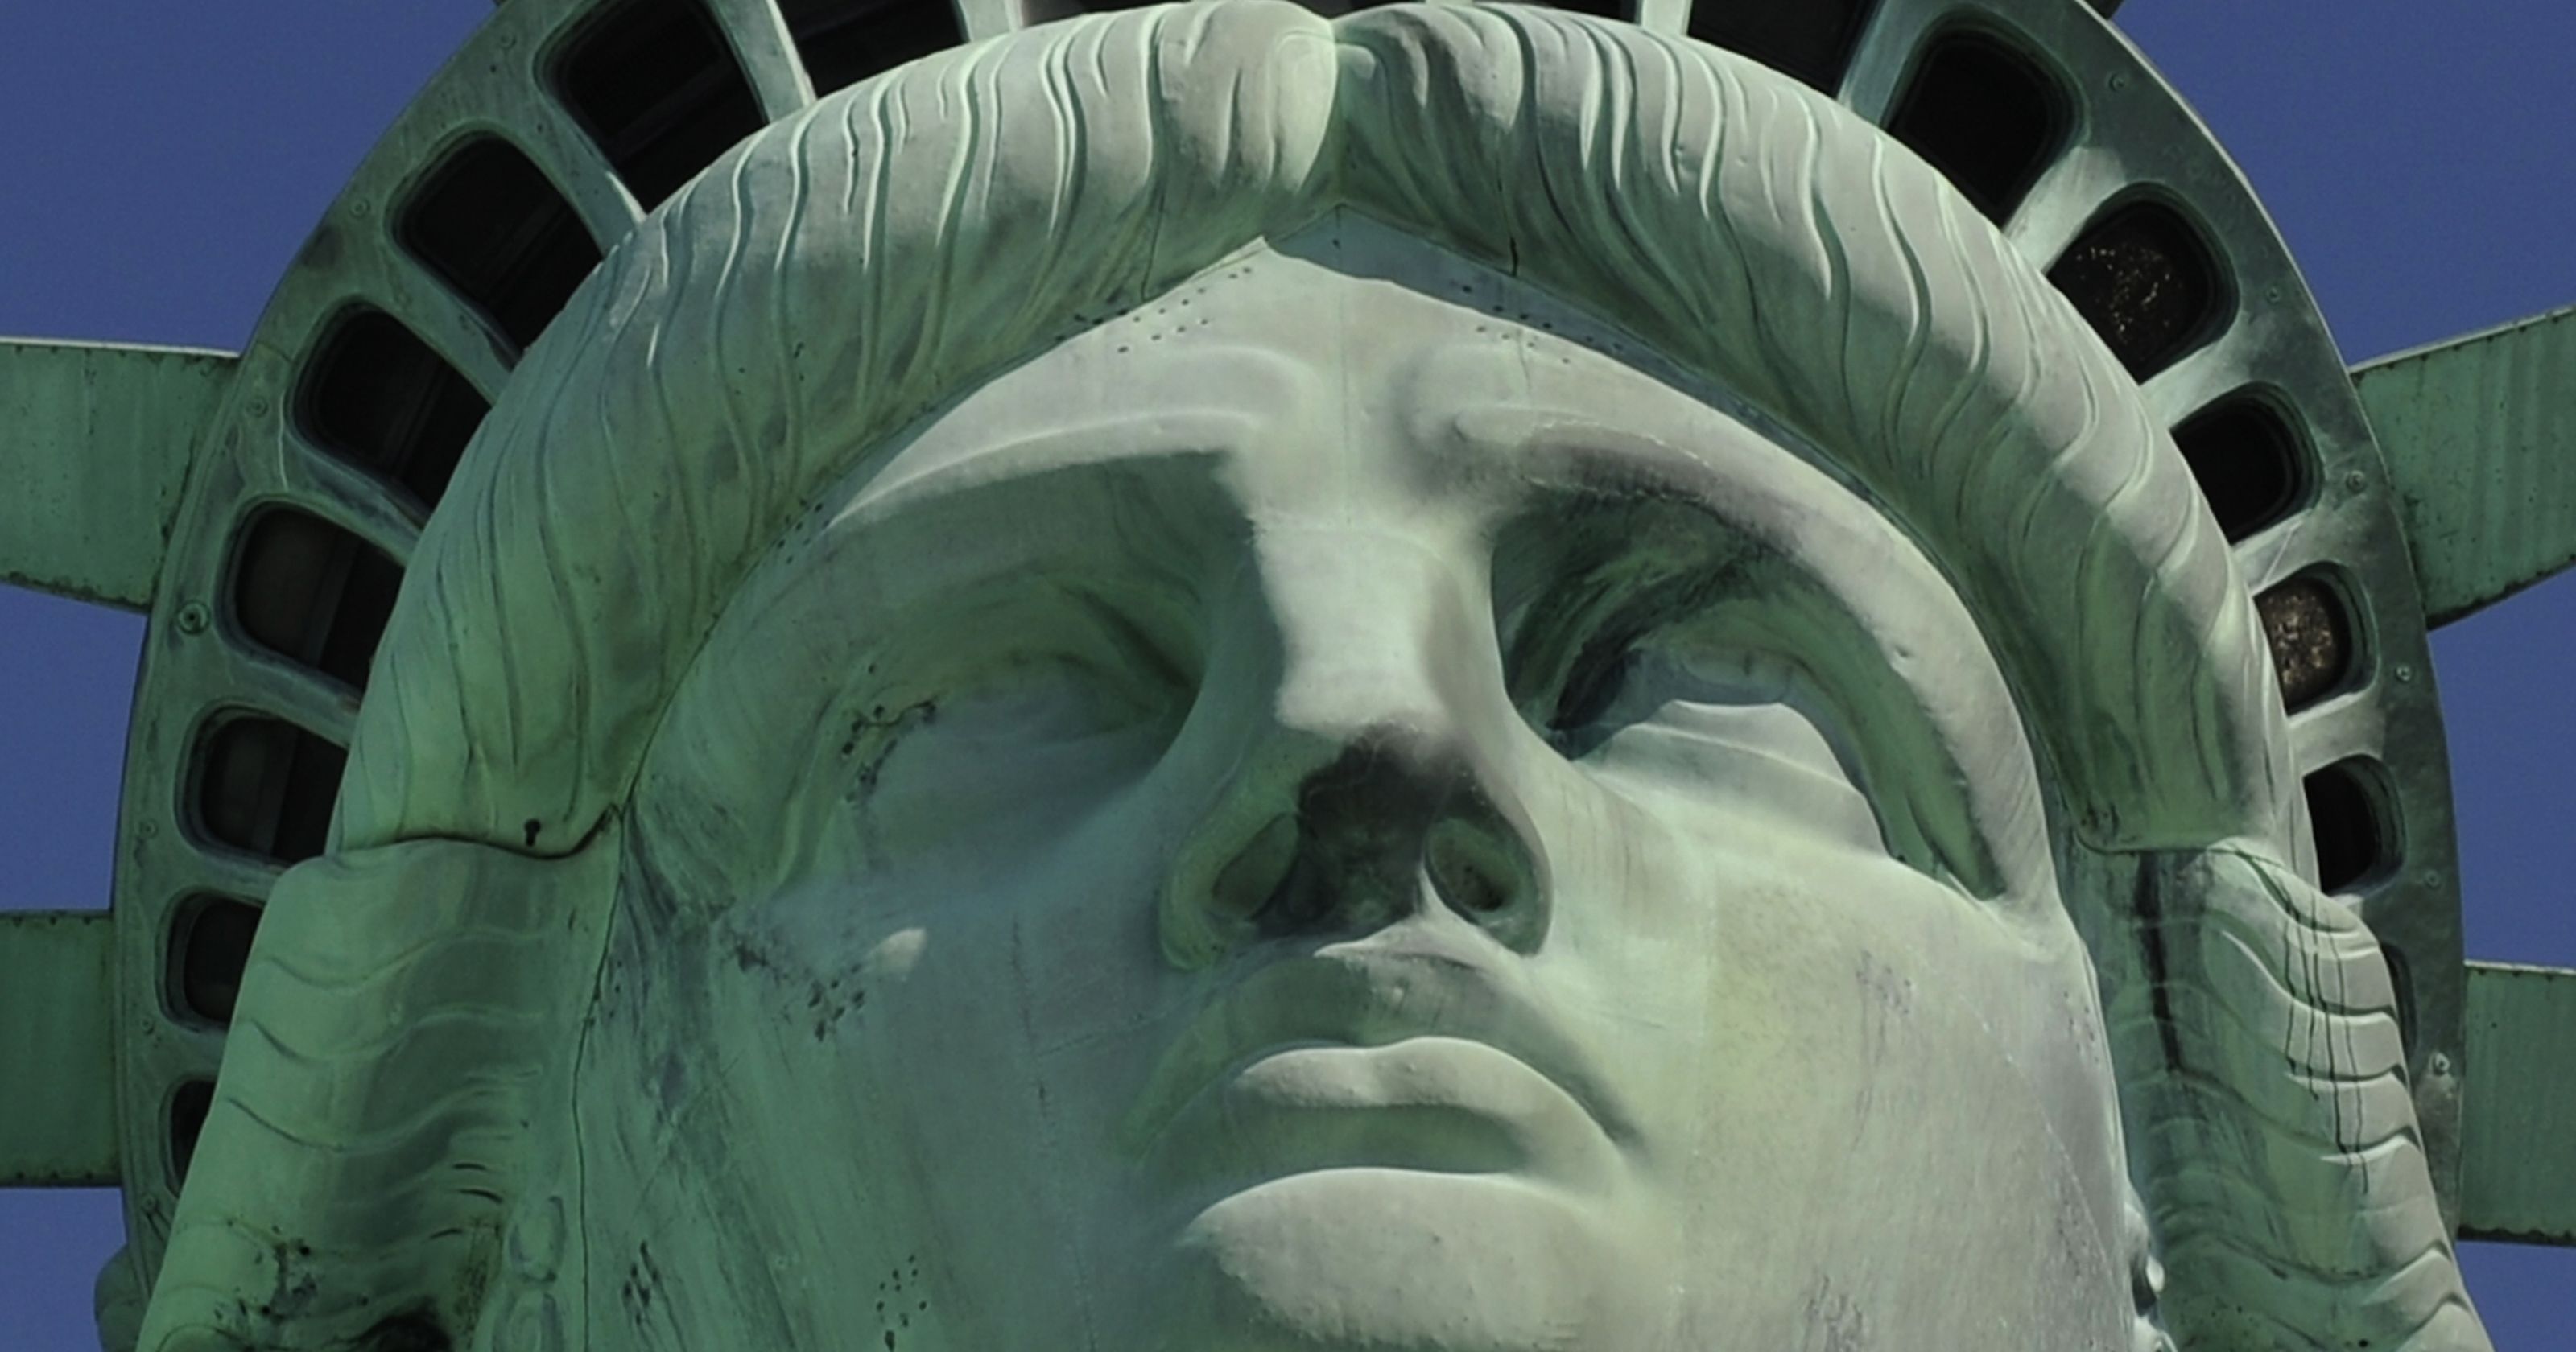 The Statue of Liberty was modeled after an Arab woman